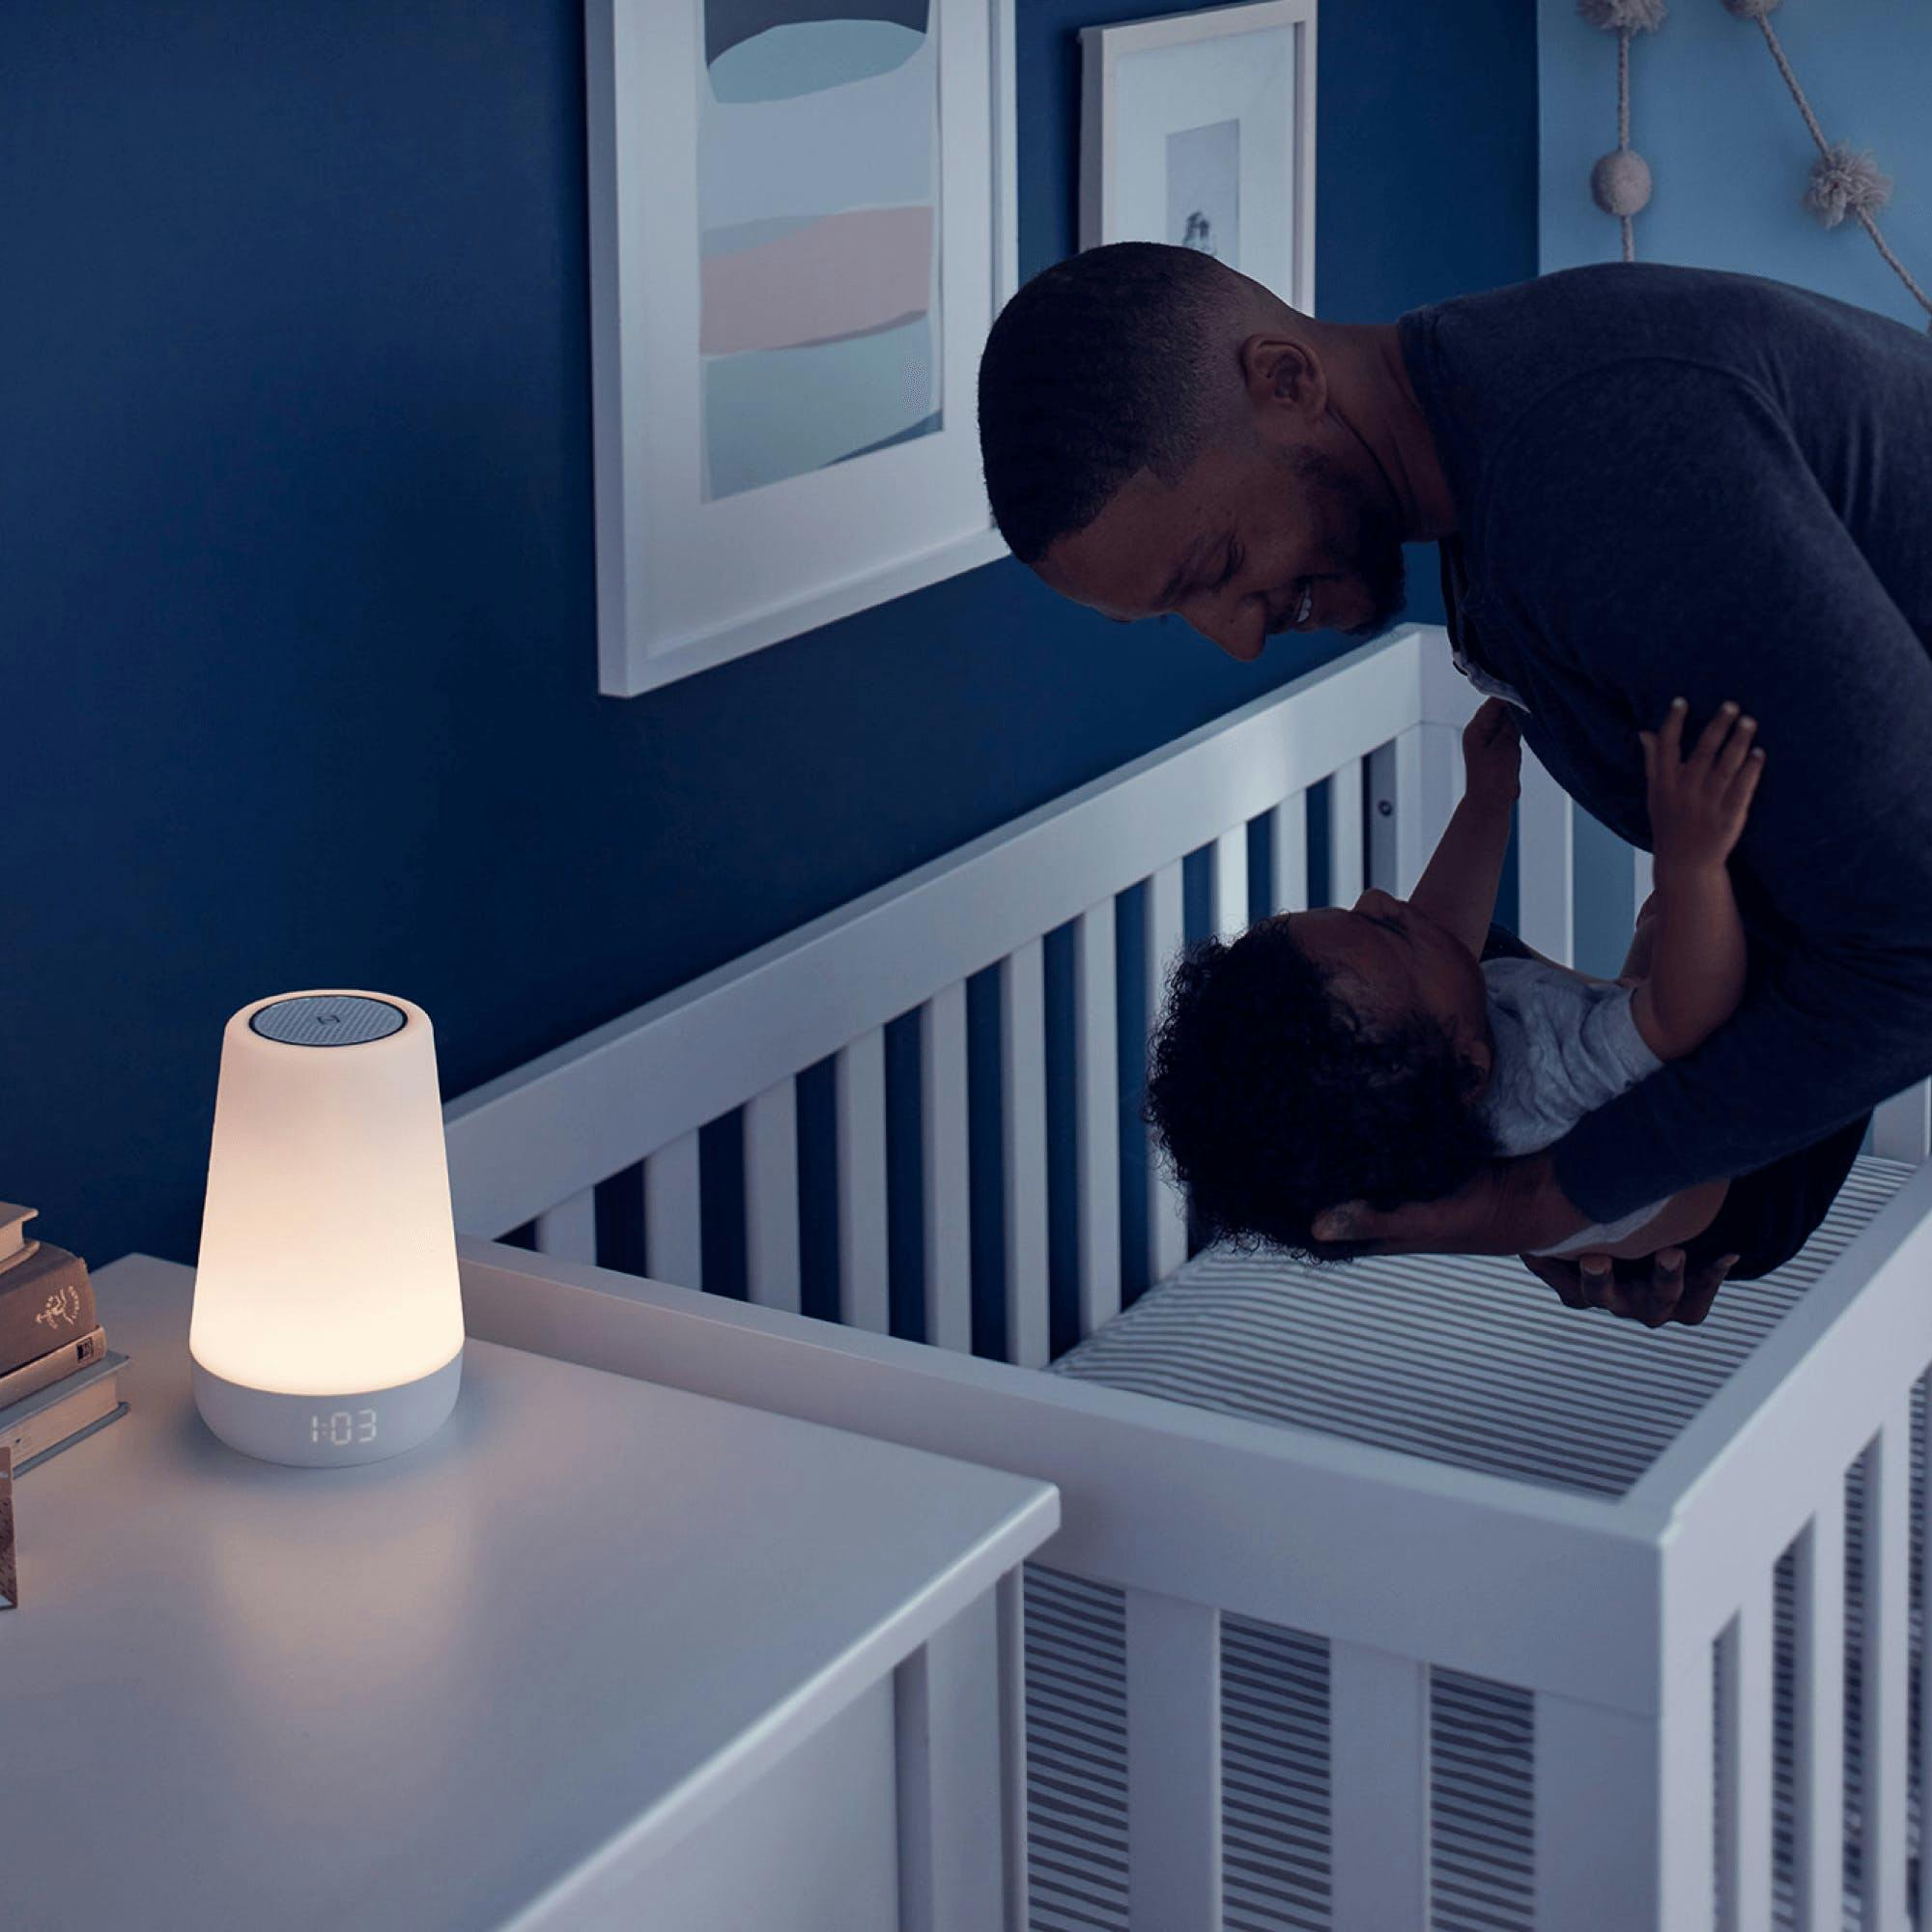 A father puts a baby into crib at night